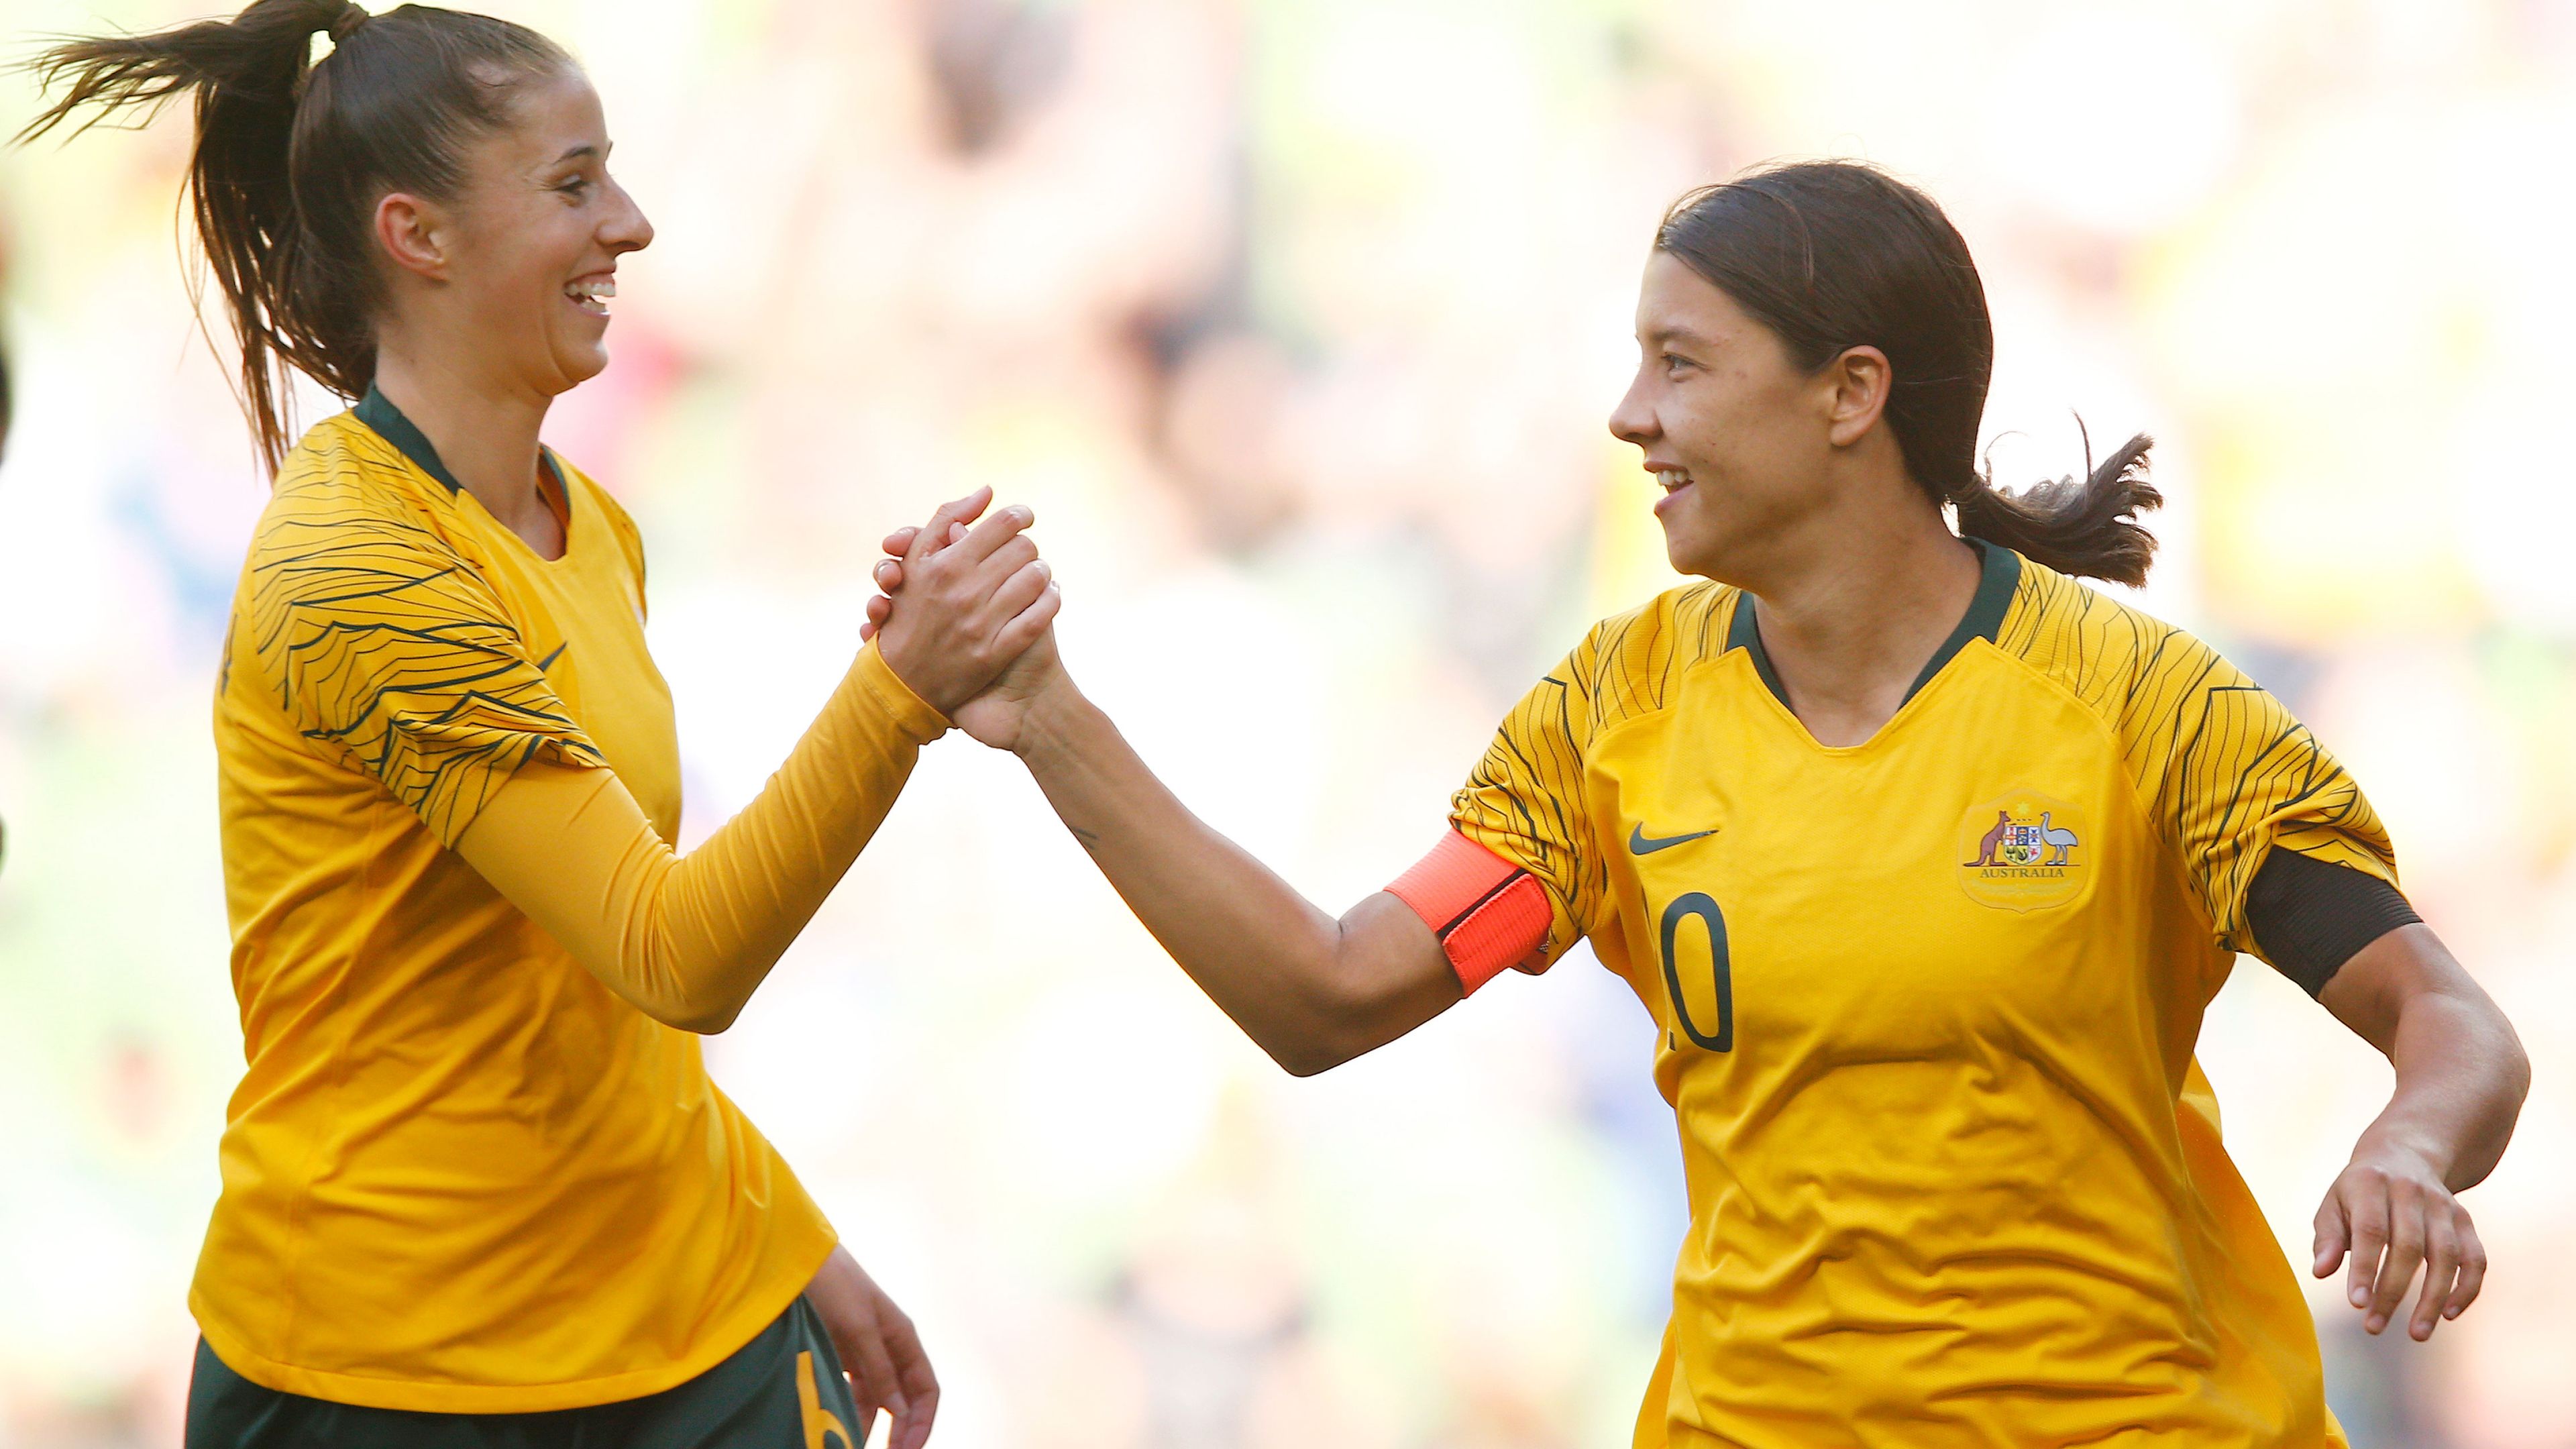 Matildas legend expects Women's World Cup to elevate sports equality in Australia